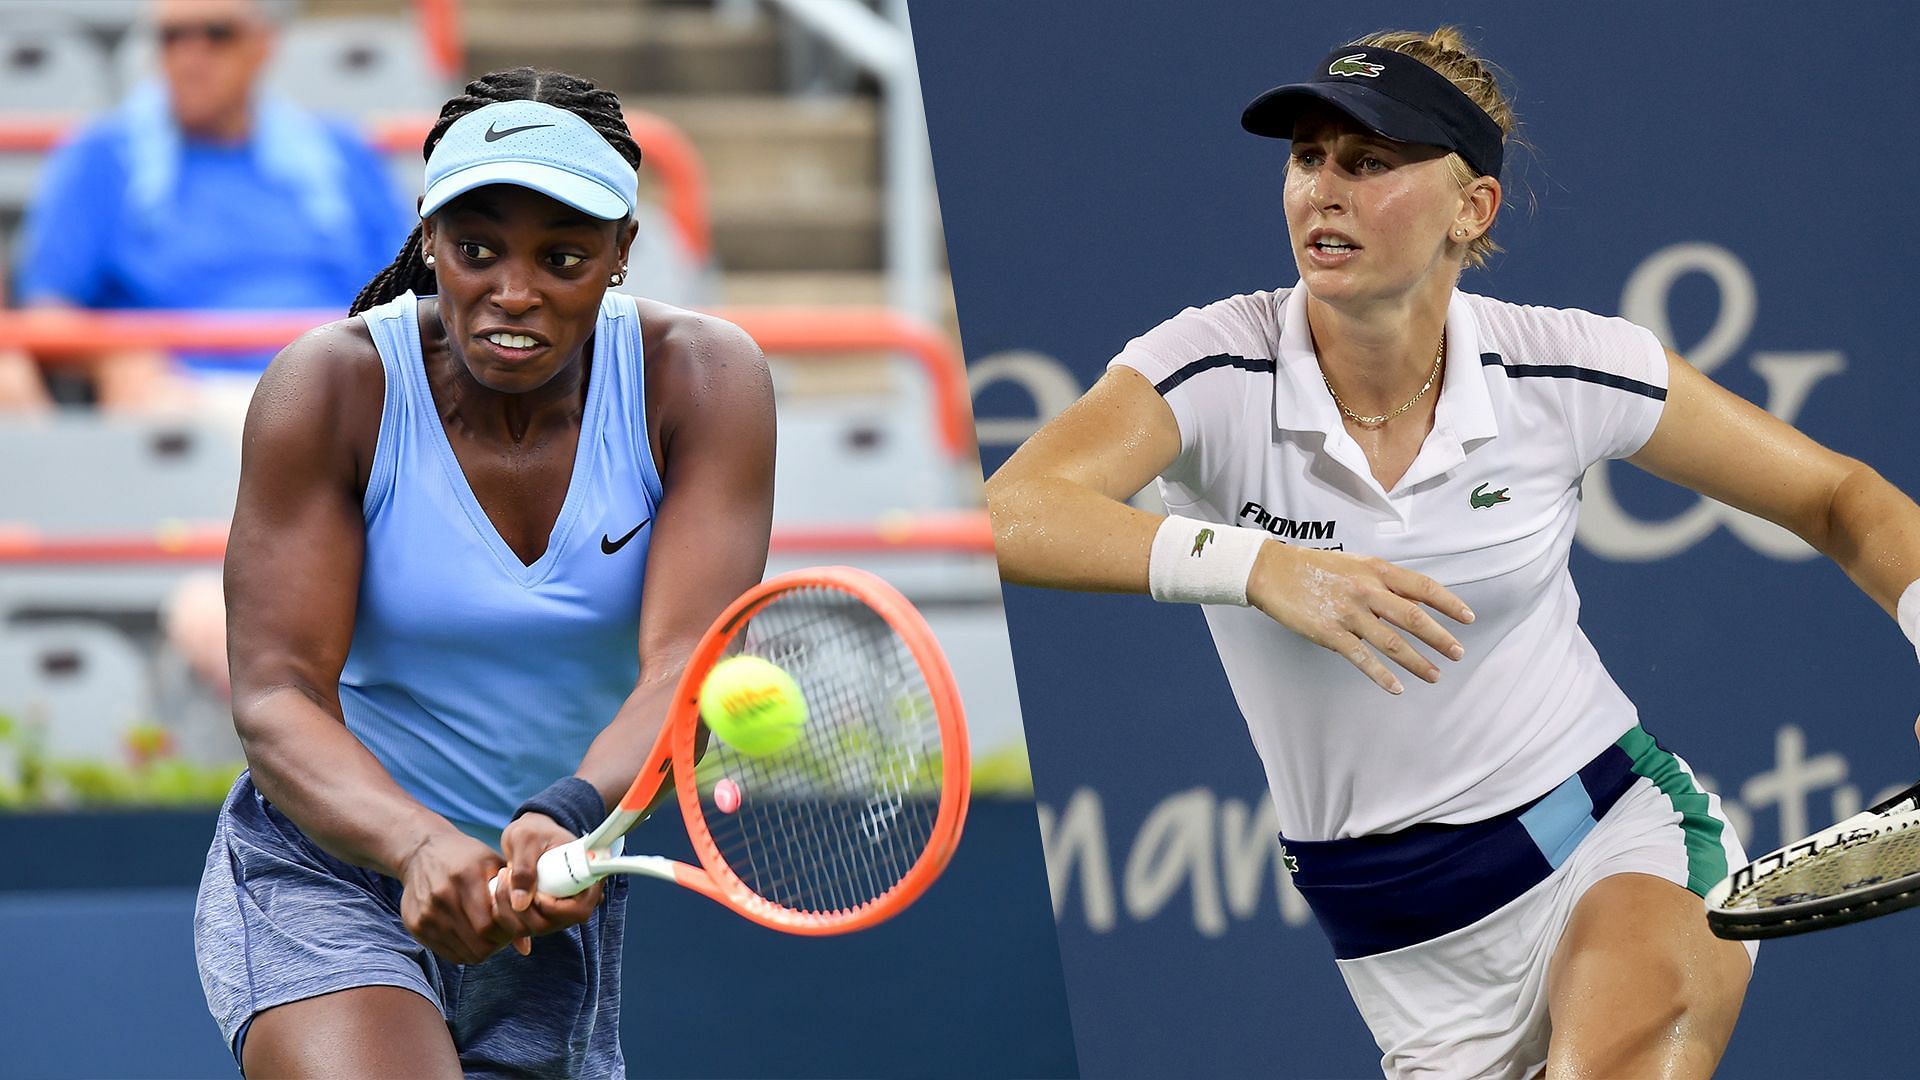 Sloane Stephens will face Jil Teichmann in the first round of the San Diego Open